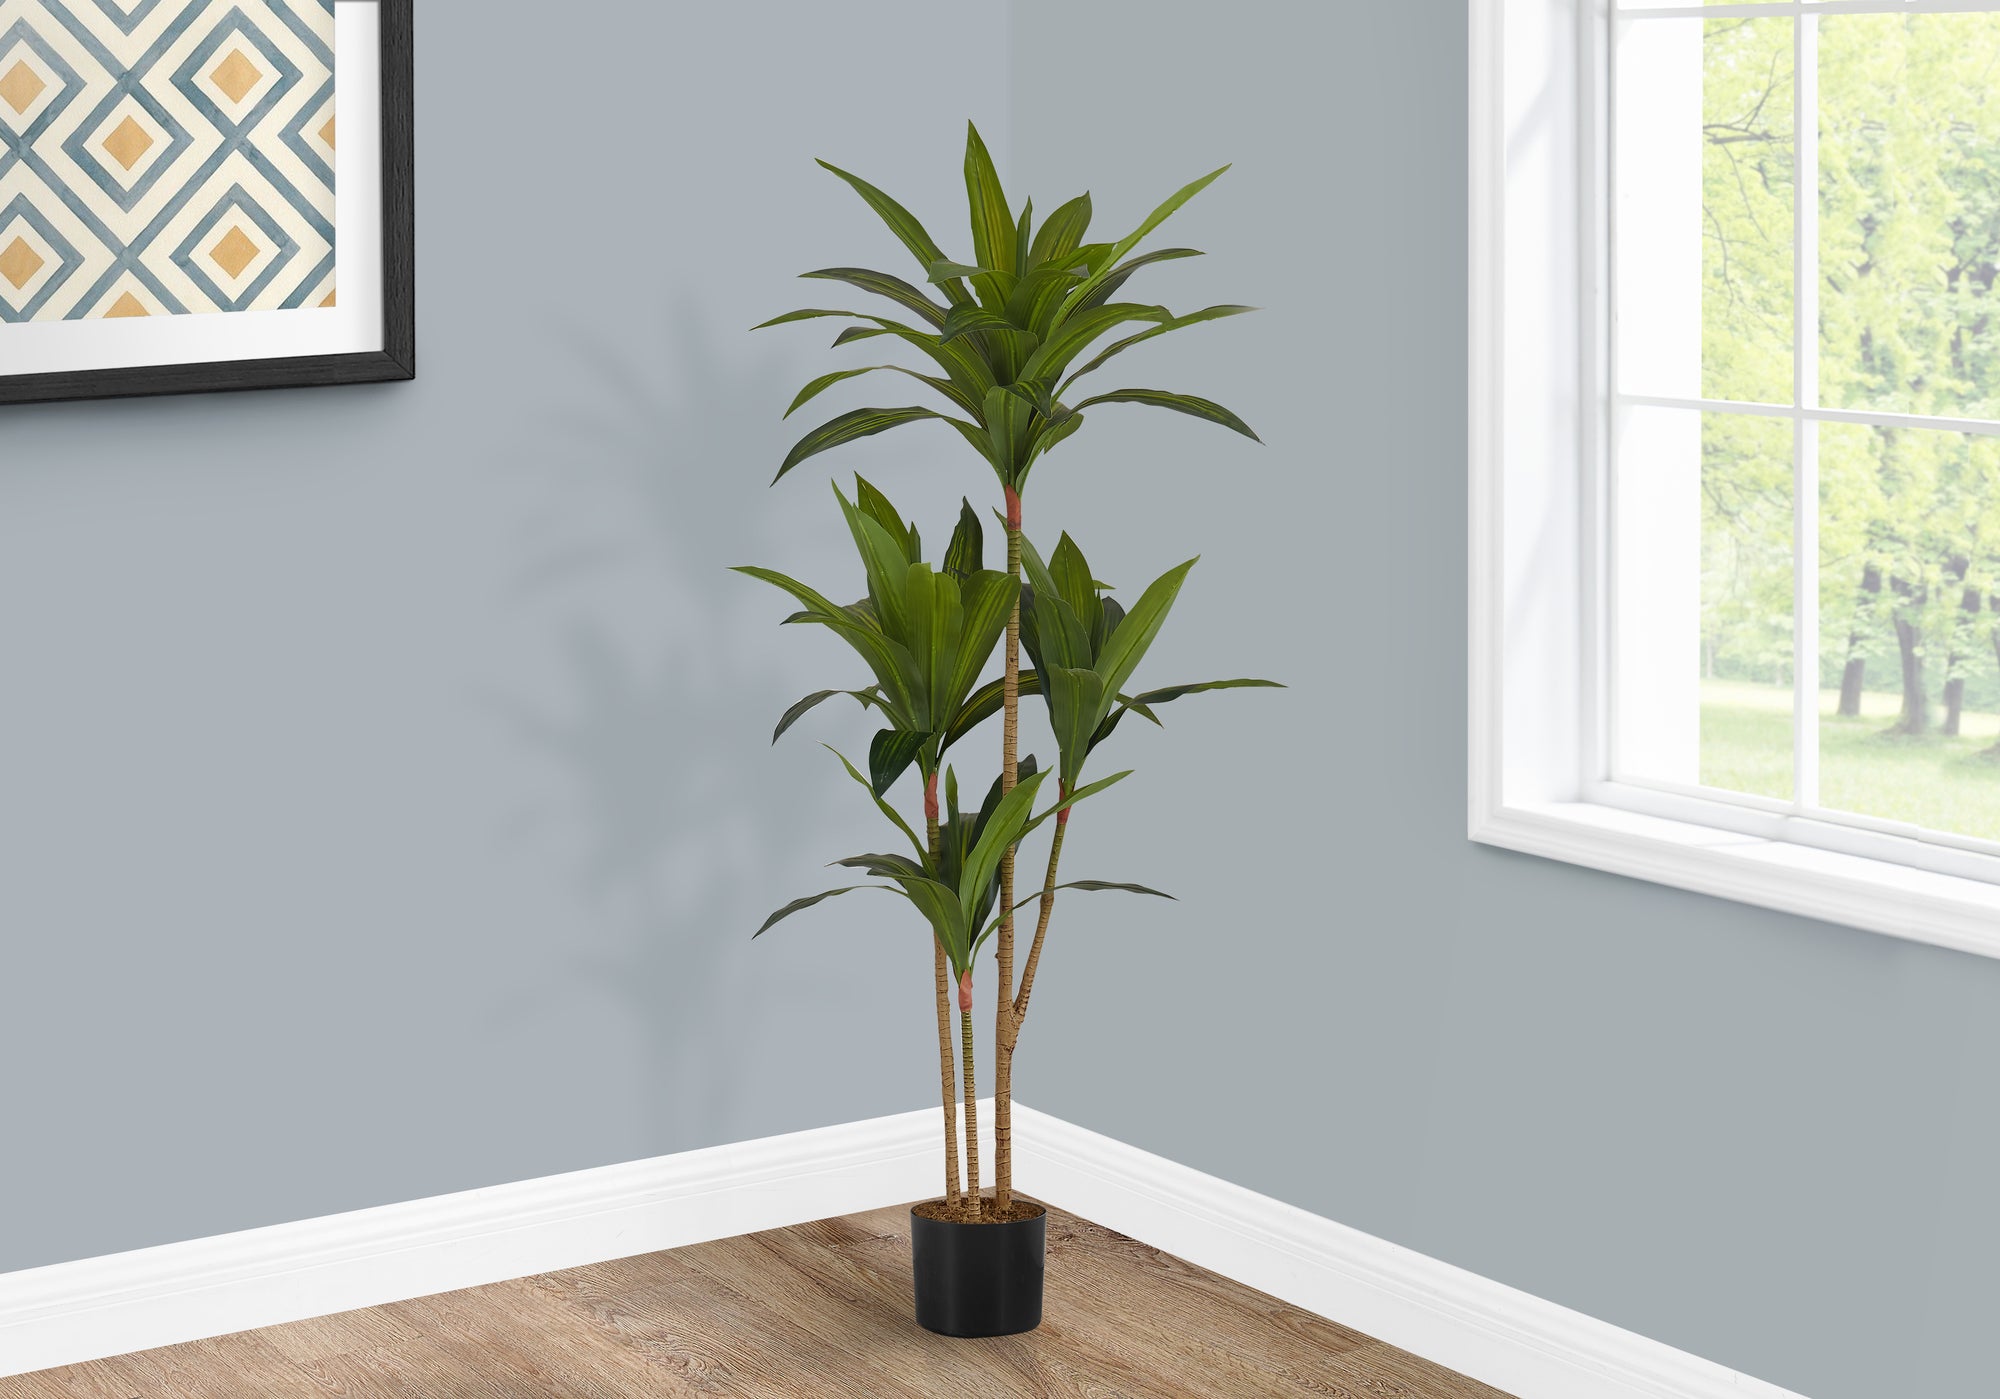 MN-499543    Artificial Plant, 51" Tall, Dracaena Tree, Indoor, Faux, Fake, Floor, Greenery, Potted, Real Touch, Decorative, Green Leaves, Black Pot